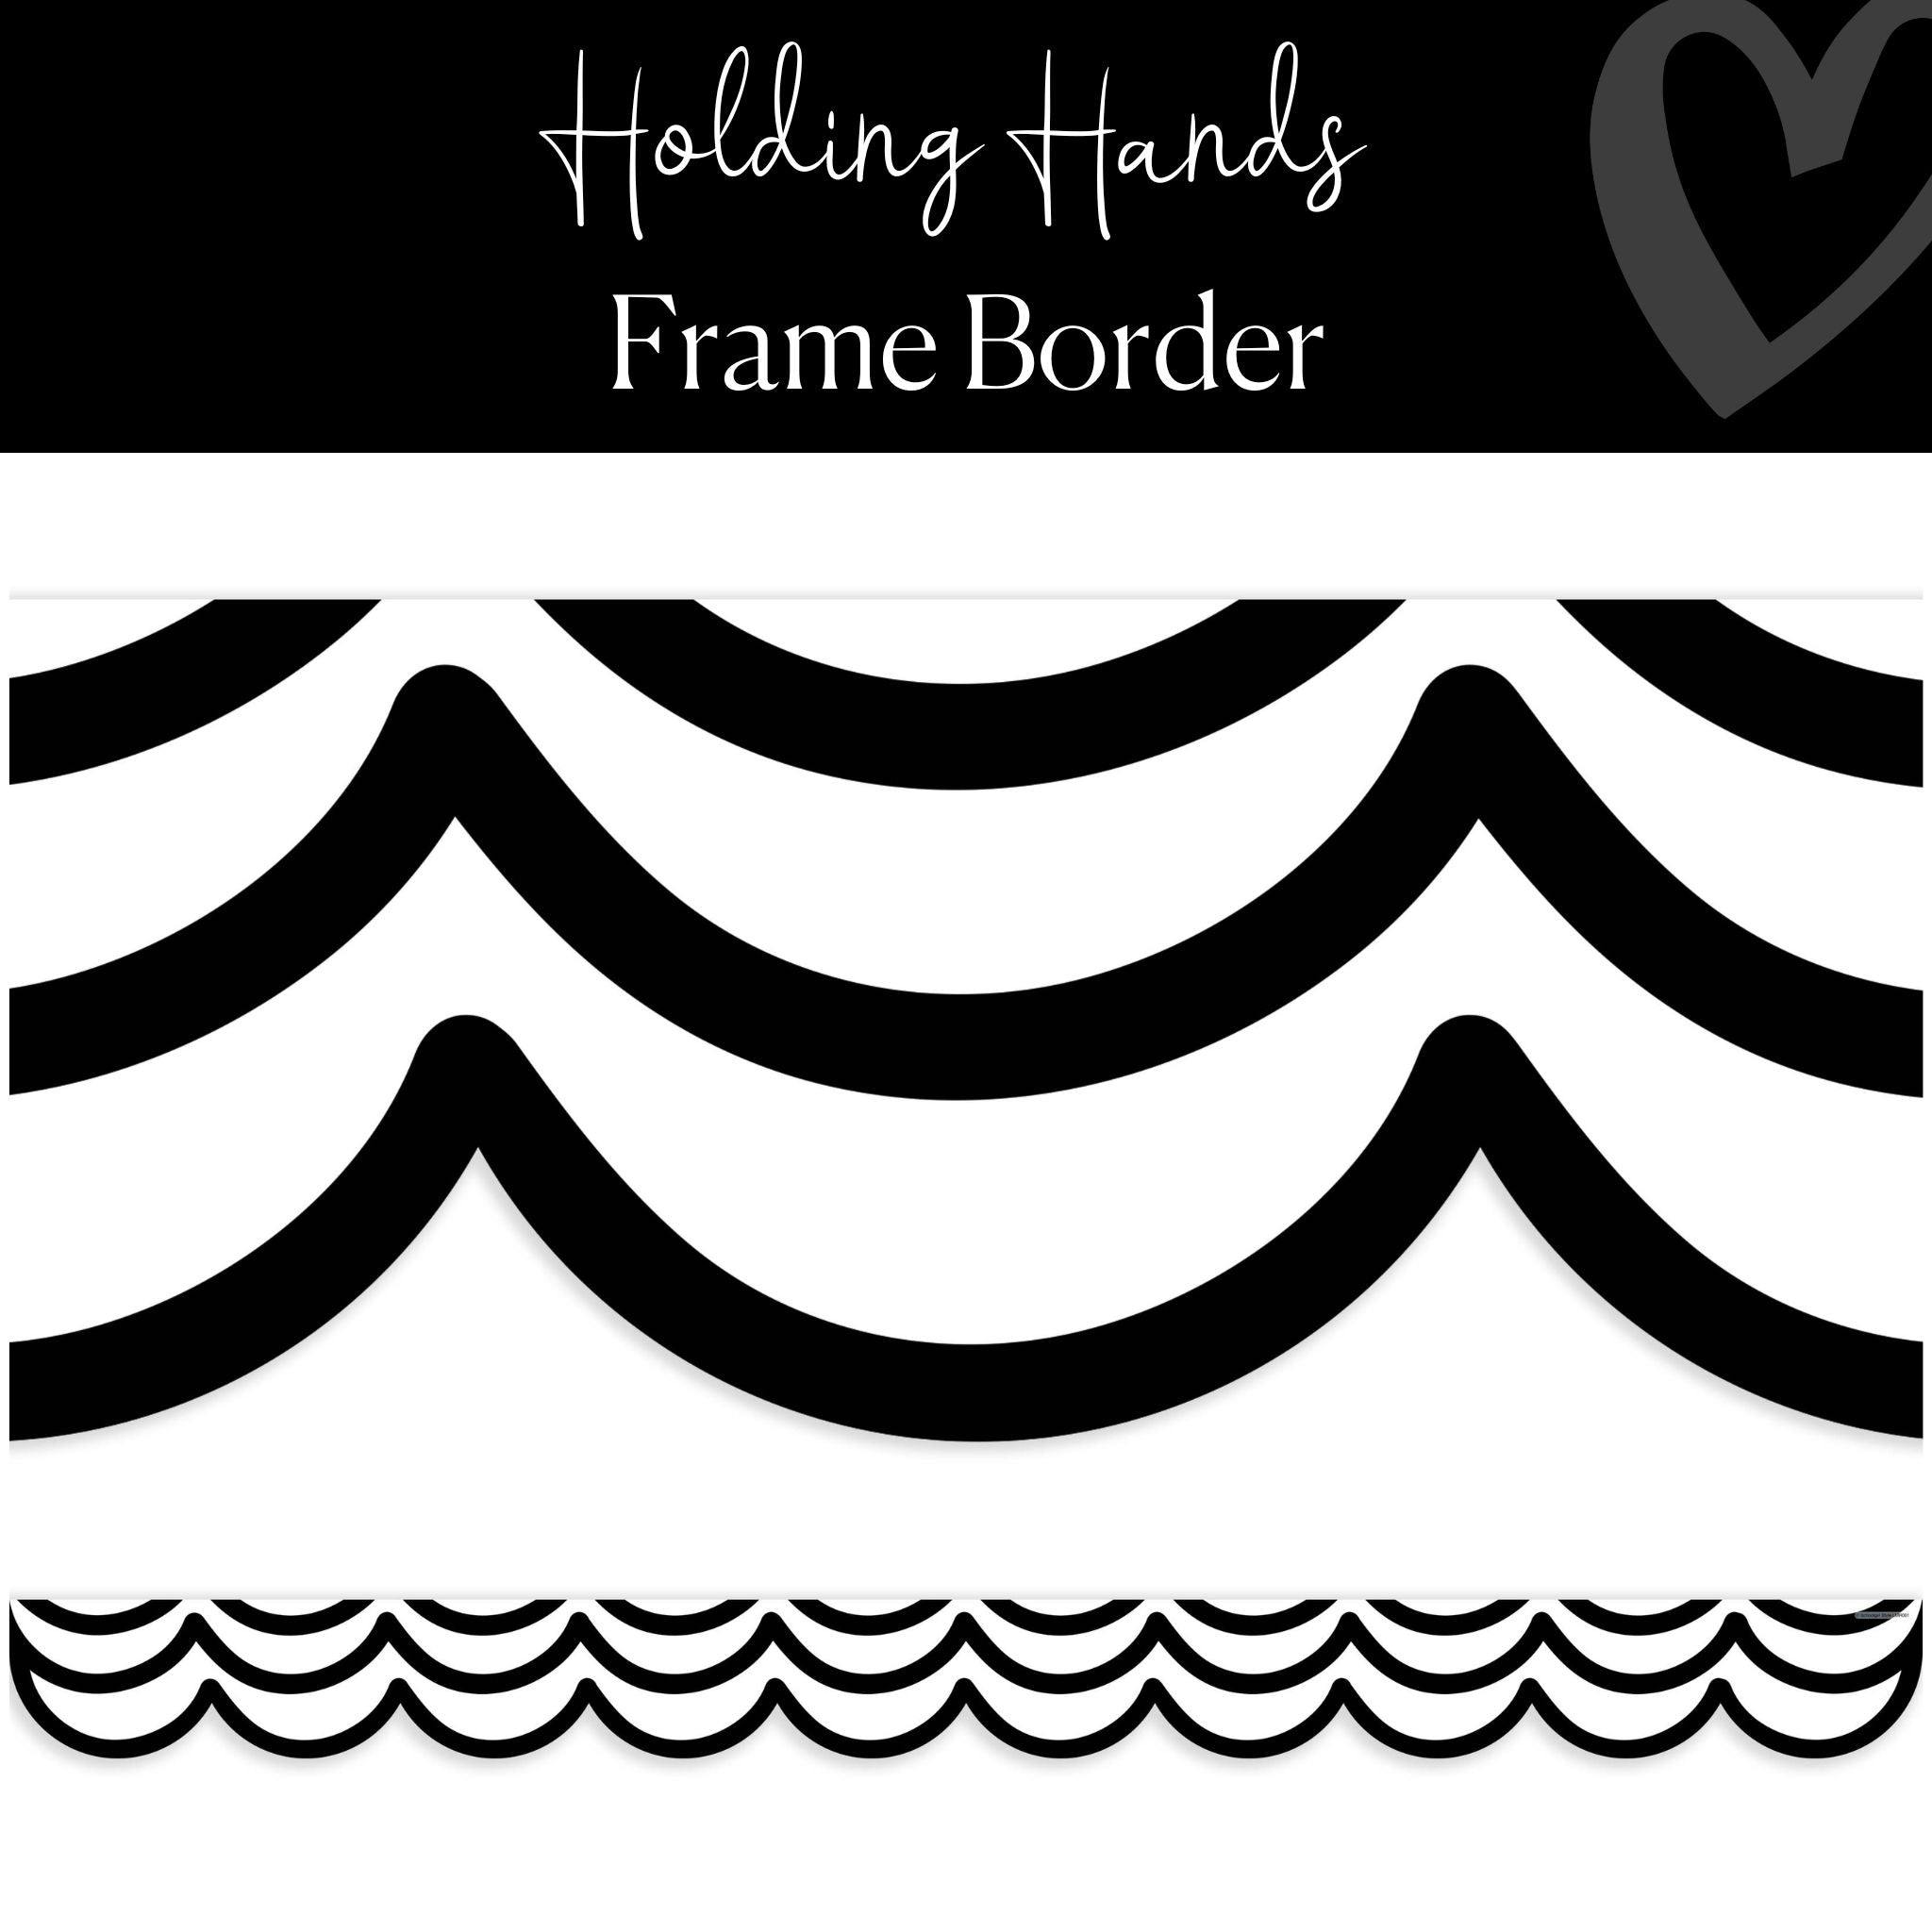 Black and White Wavy Frame Border | Black and White Scallop Border | "Holding Hands" Frame Border | Schoolgirl Style